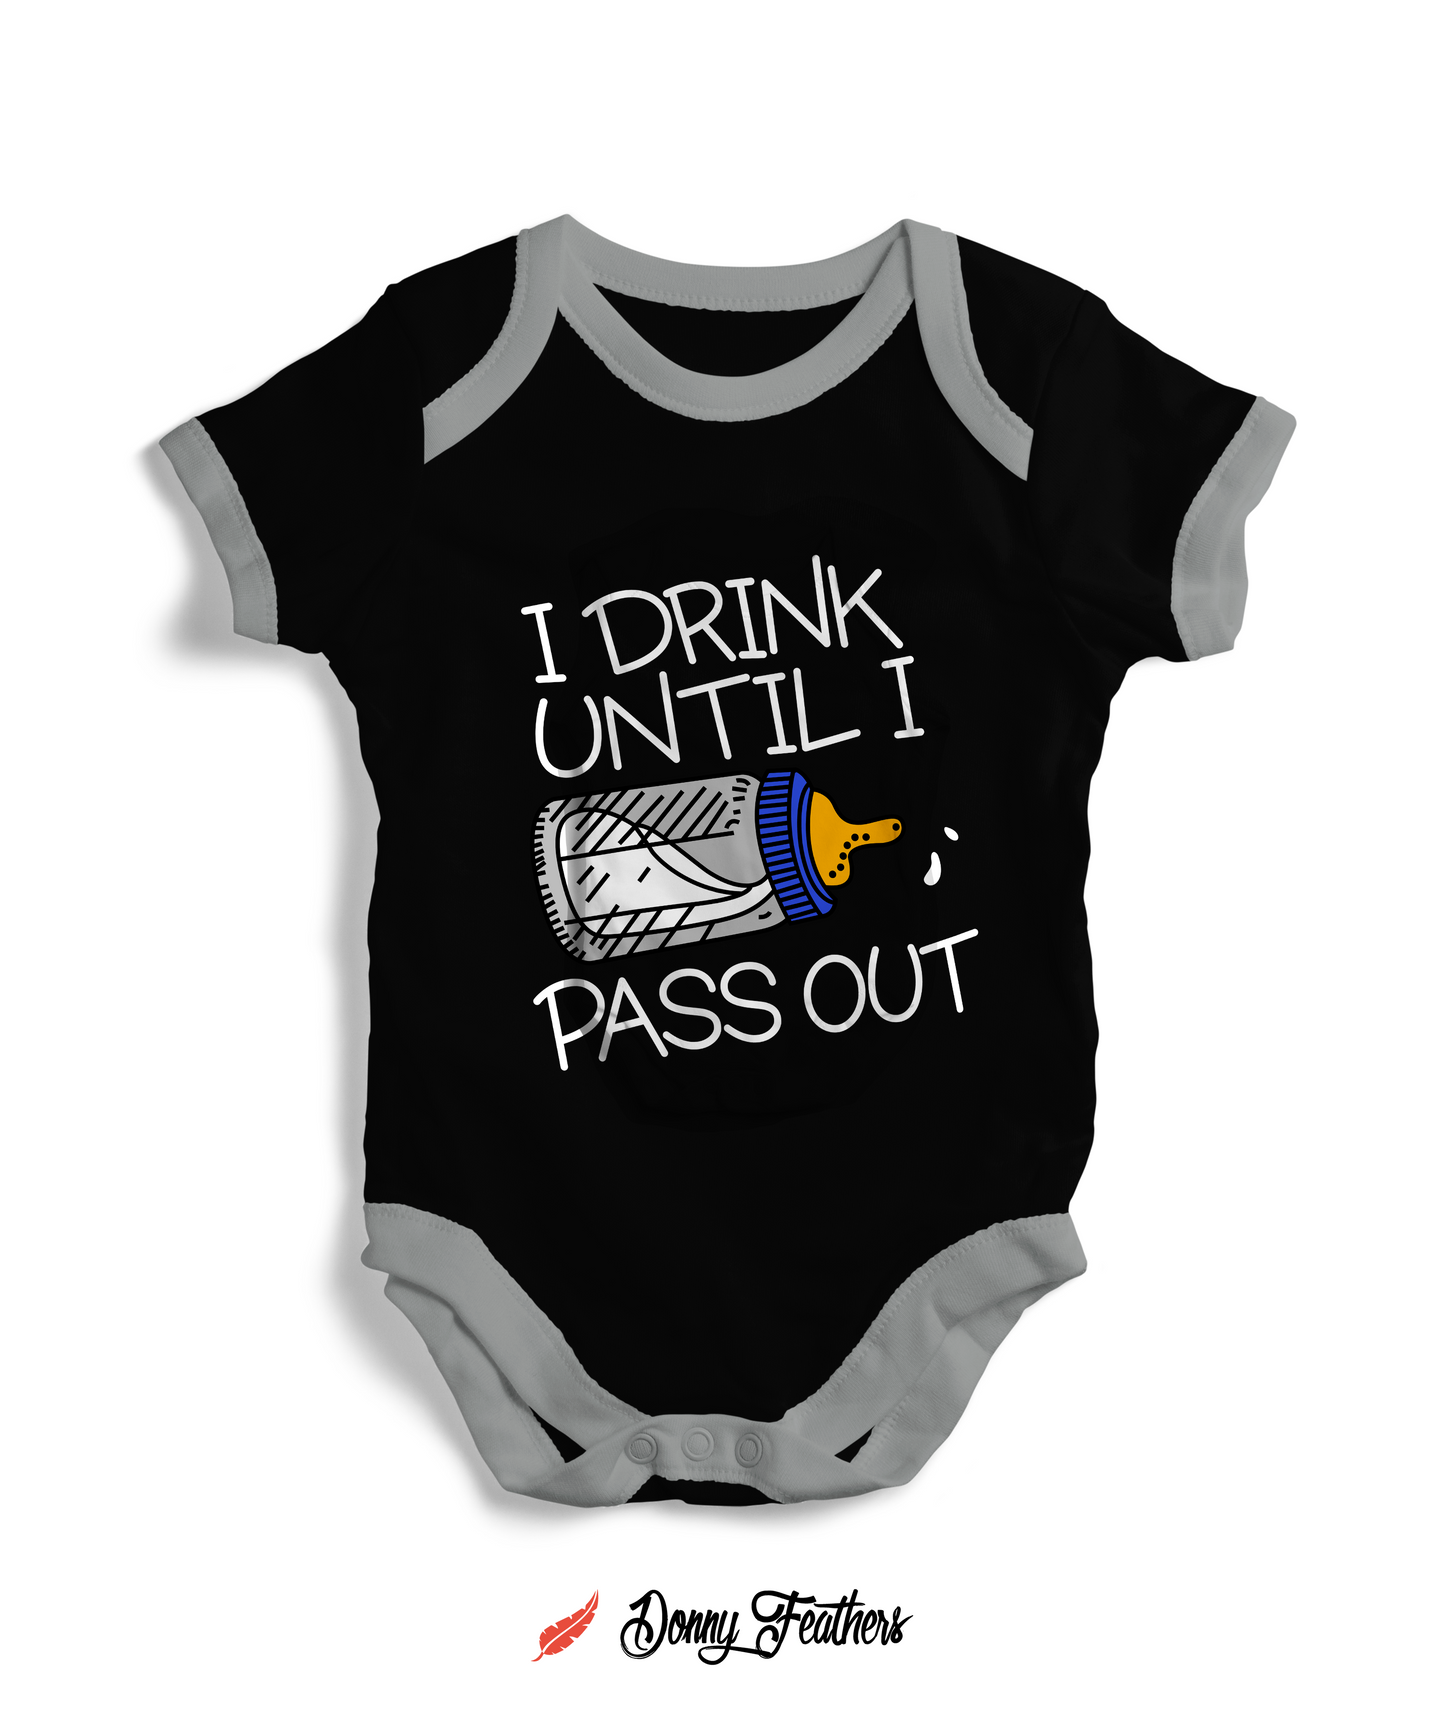 Baby Bodysuits | I Drink Until I Pass Out Romper (Black) By: Donny Feathers